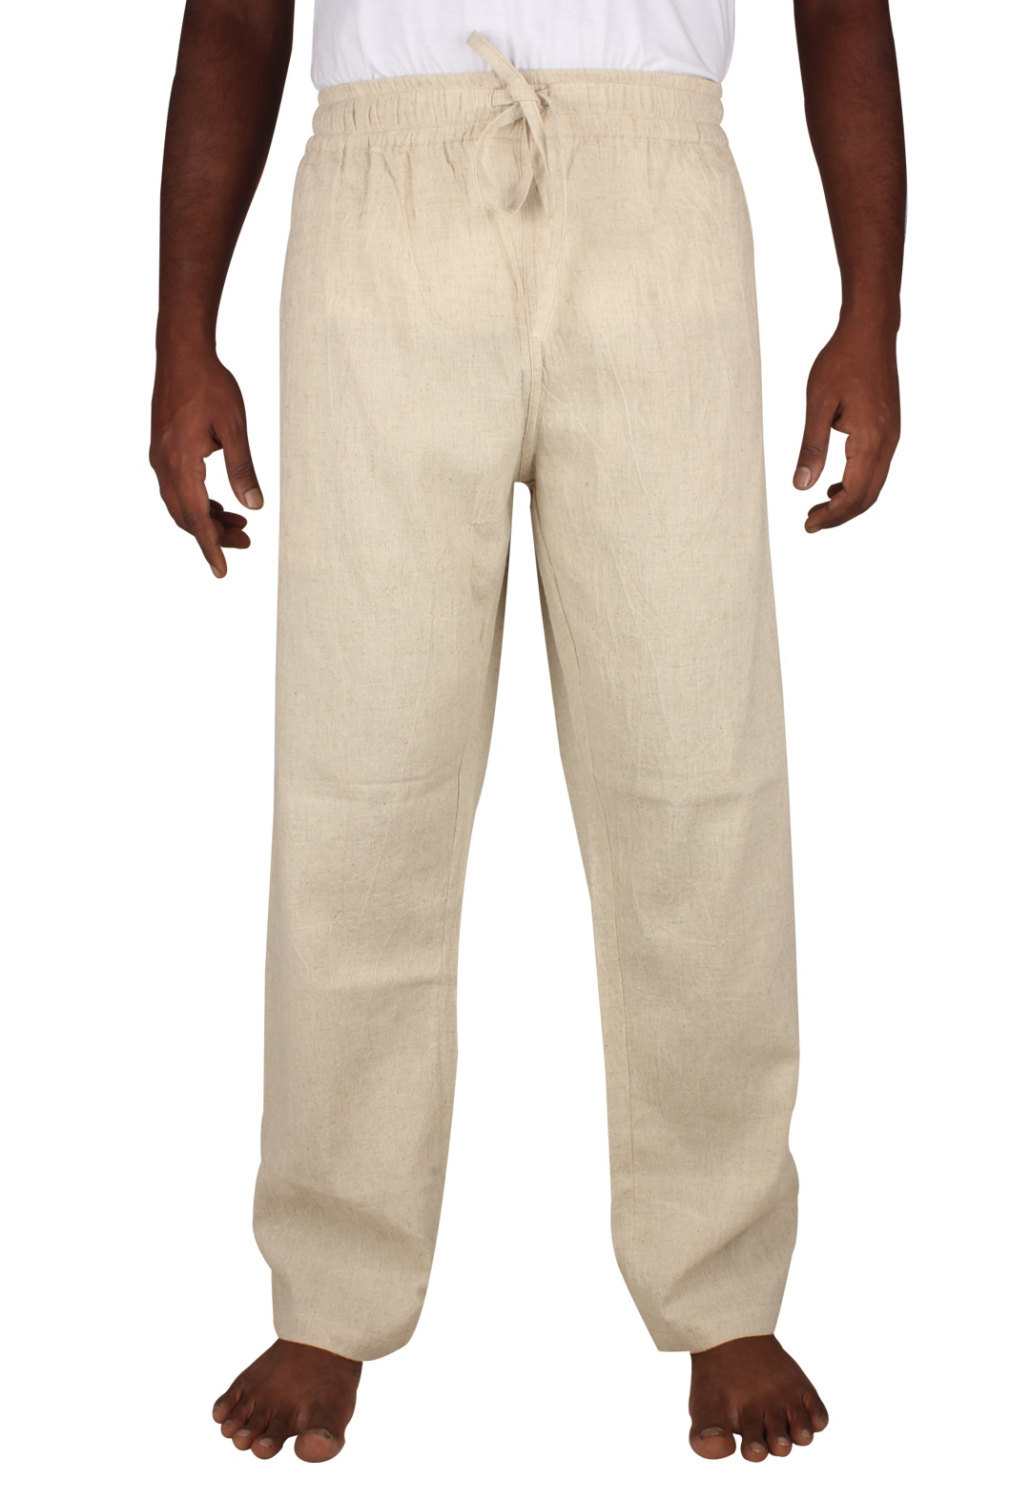 Mens  Linen  Drawstring pants  Baggy Look without Zipper Regular and Plus